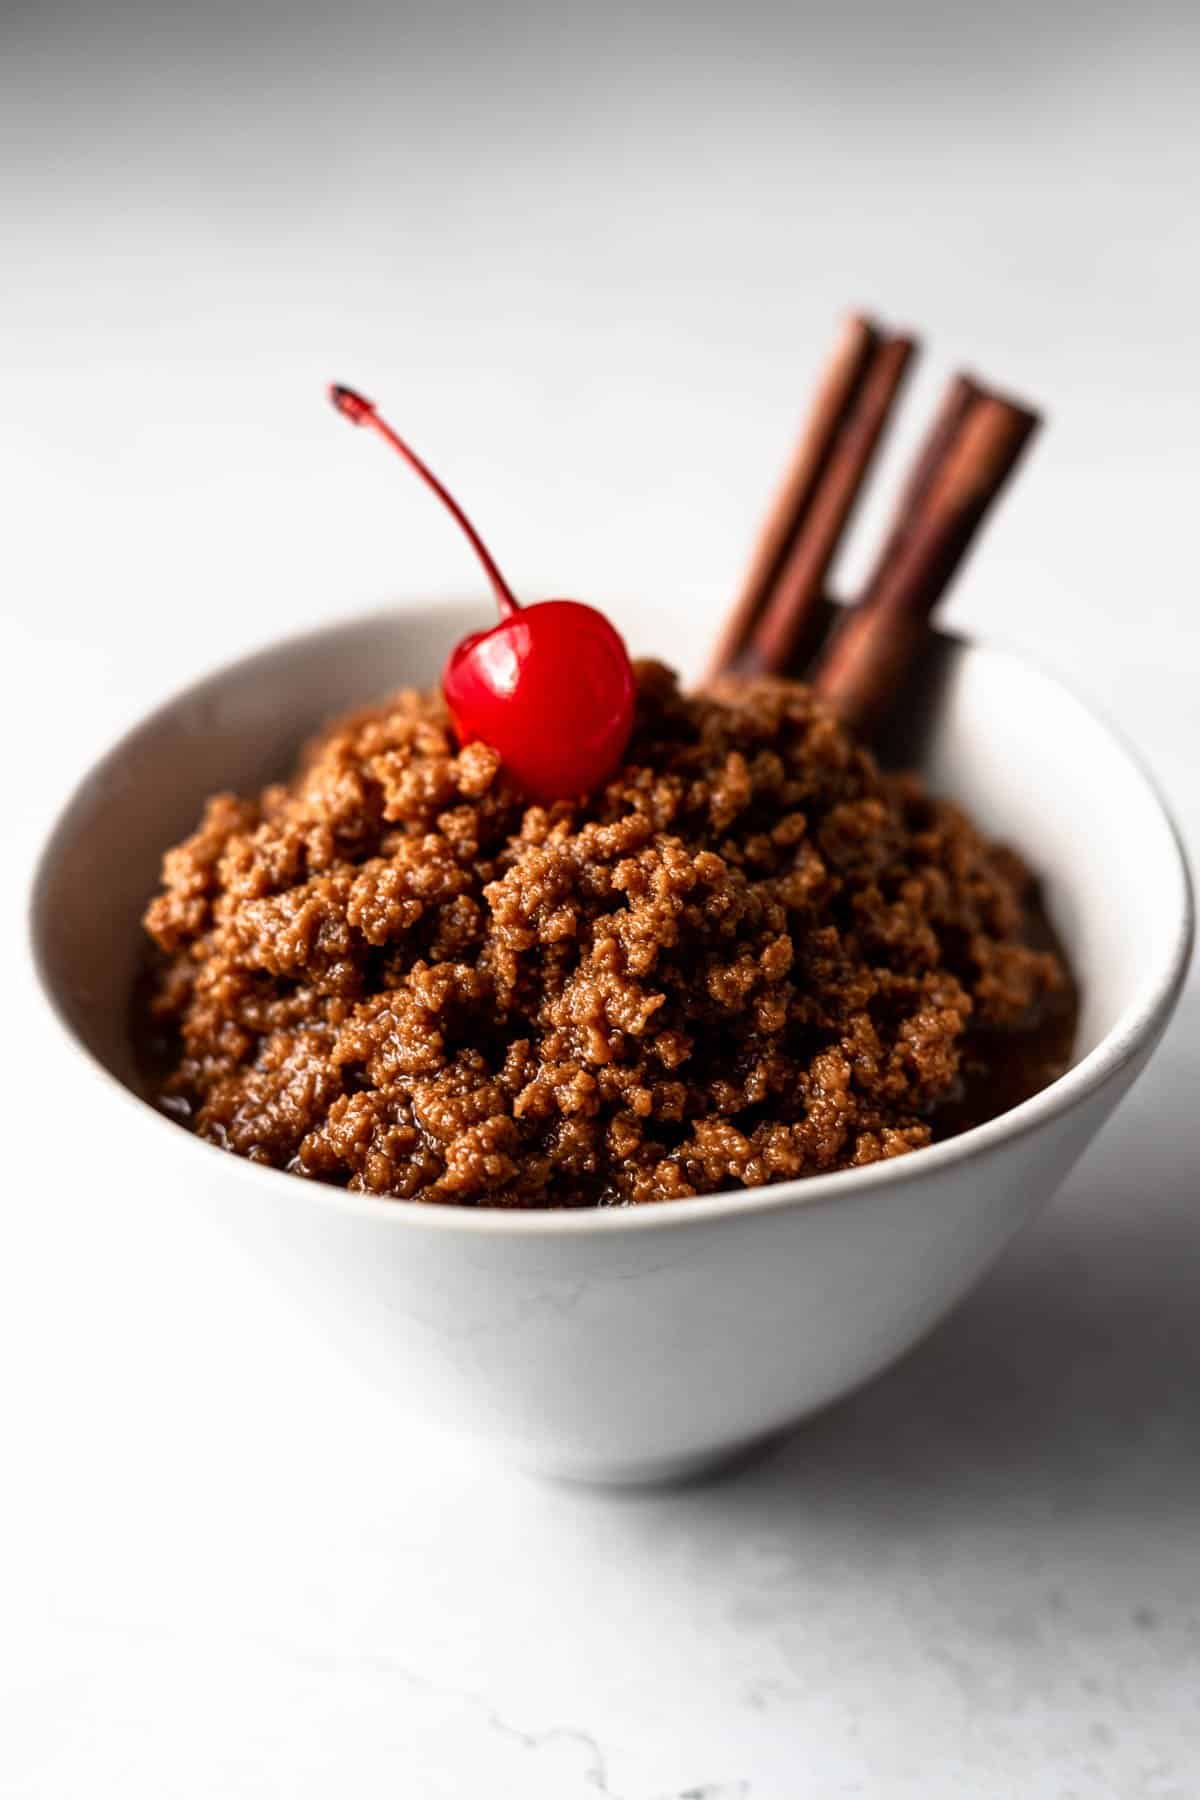 small bowl of dulce de leche cortada topped with a cherry and garnished with cinnamon sticks